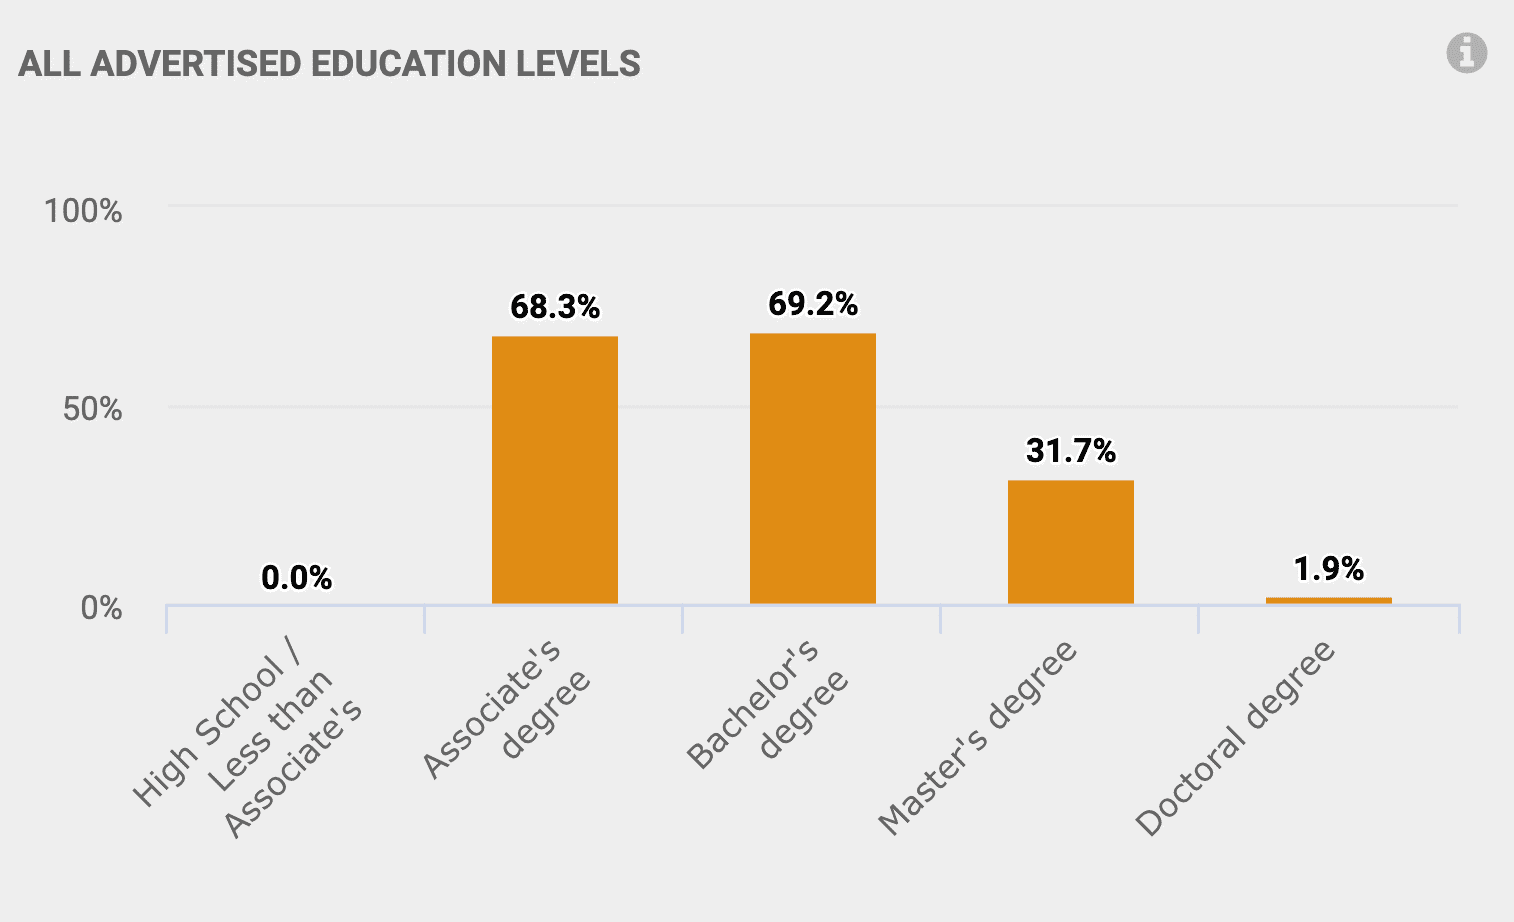 All advertised education levels: Associates Degree: 68.3% Bachelor's Degree: 69.2% Master's Degree: 31.7% Doctoral Degree: 1.9%